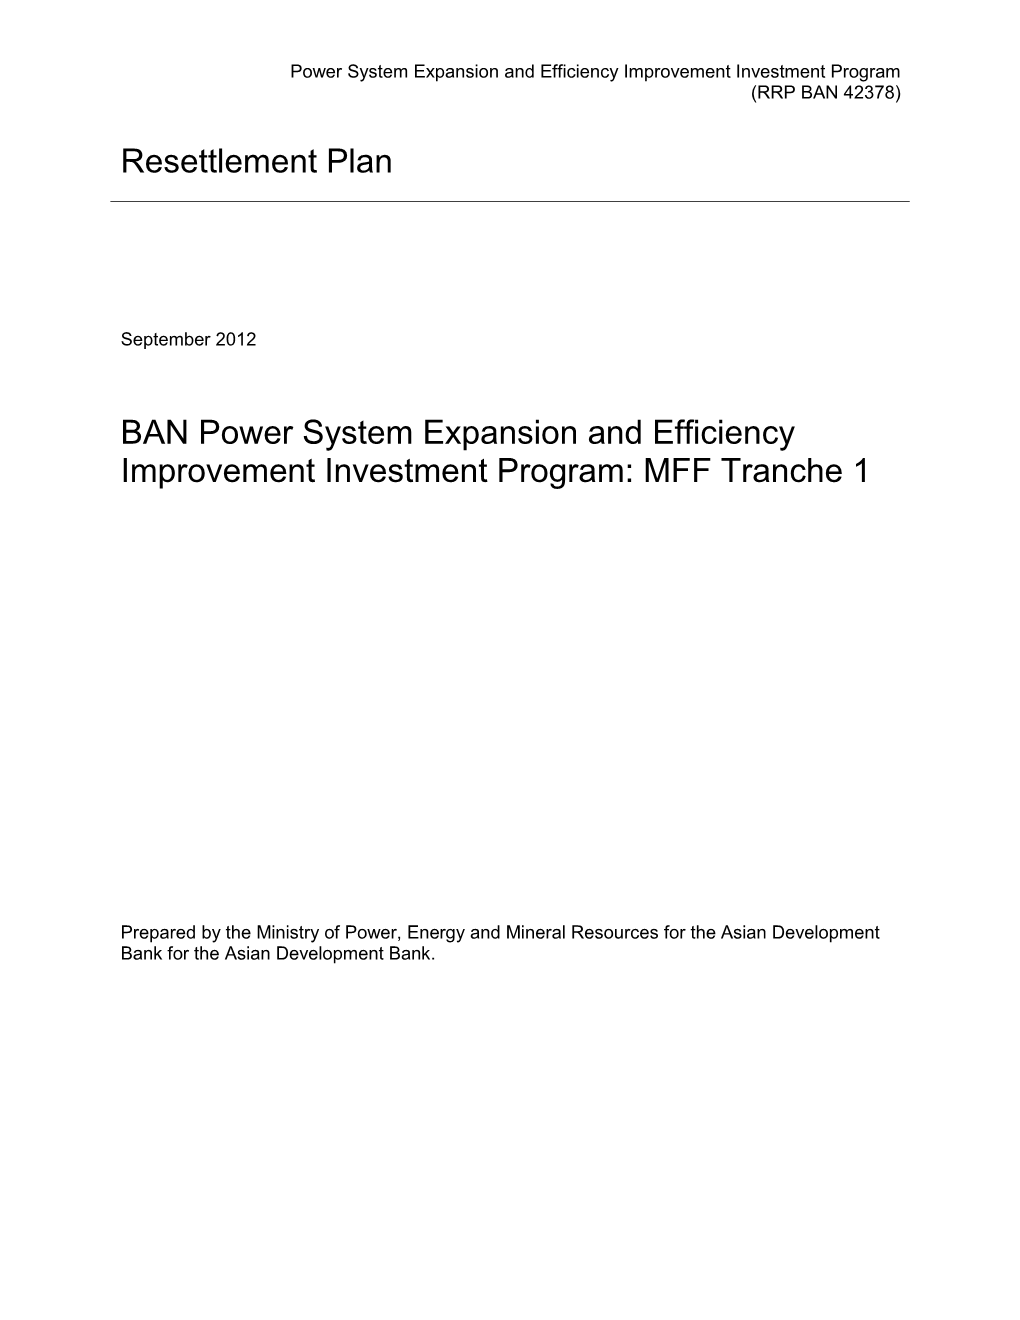 Resettlement Plan BAN Power System Expansion and Efficiency